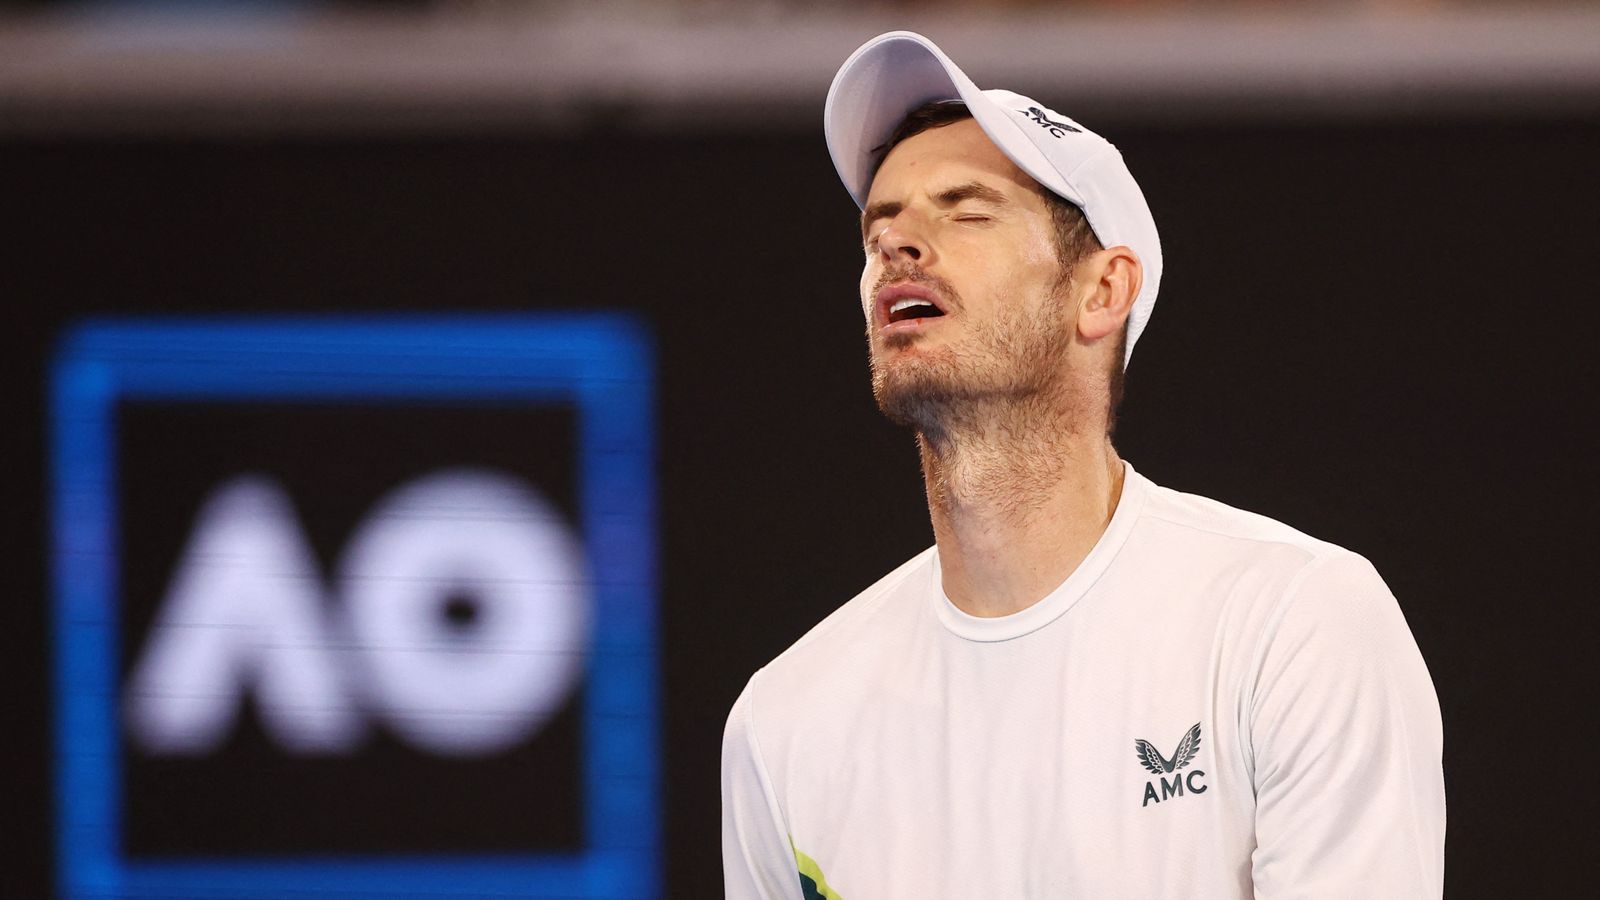 Andy Murray knocked out of Australian Open in third round after losing to Spain's Roberto Bautista Agut